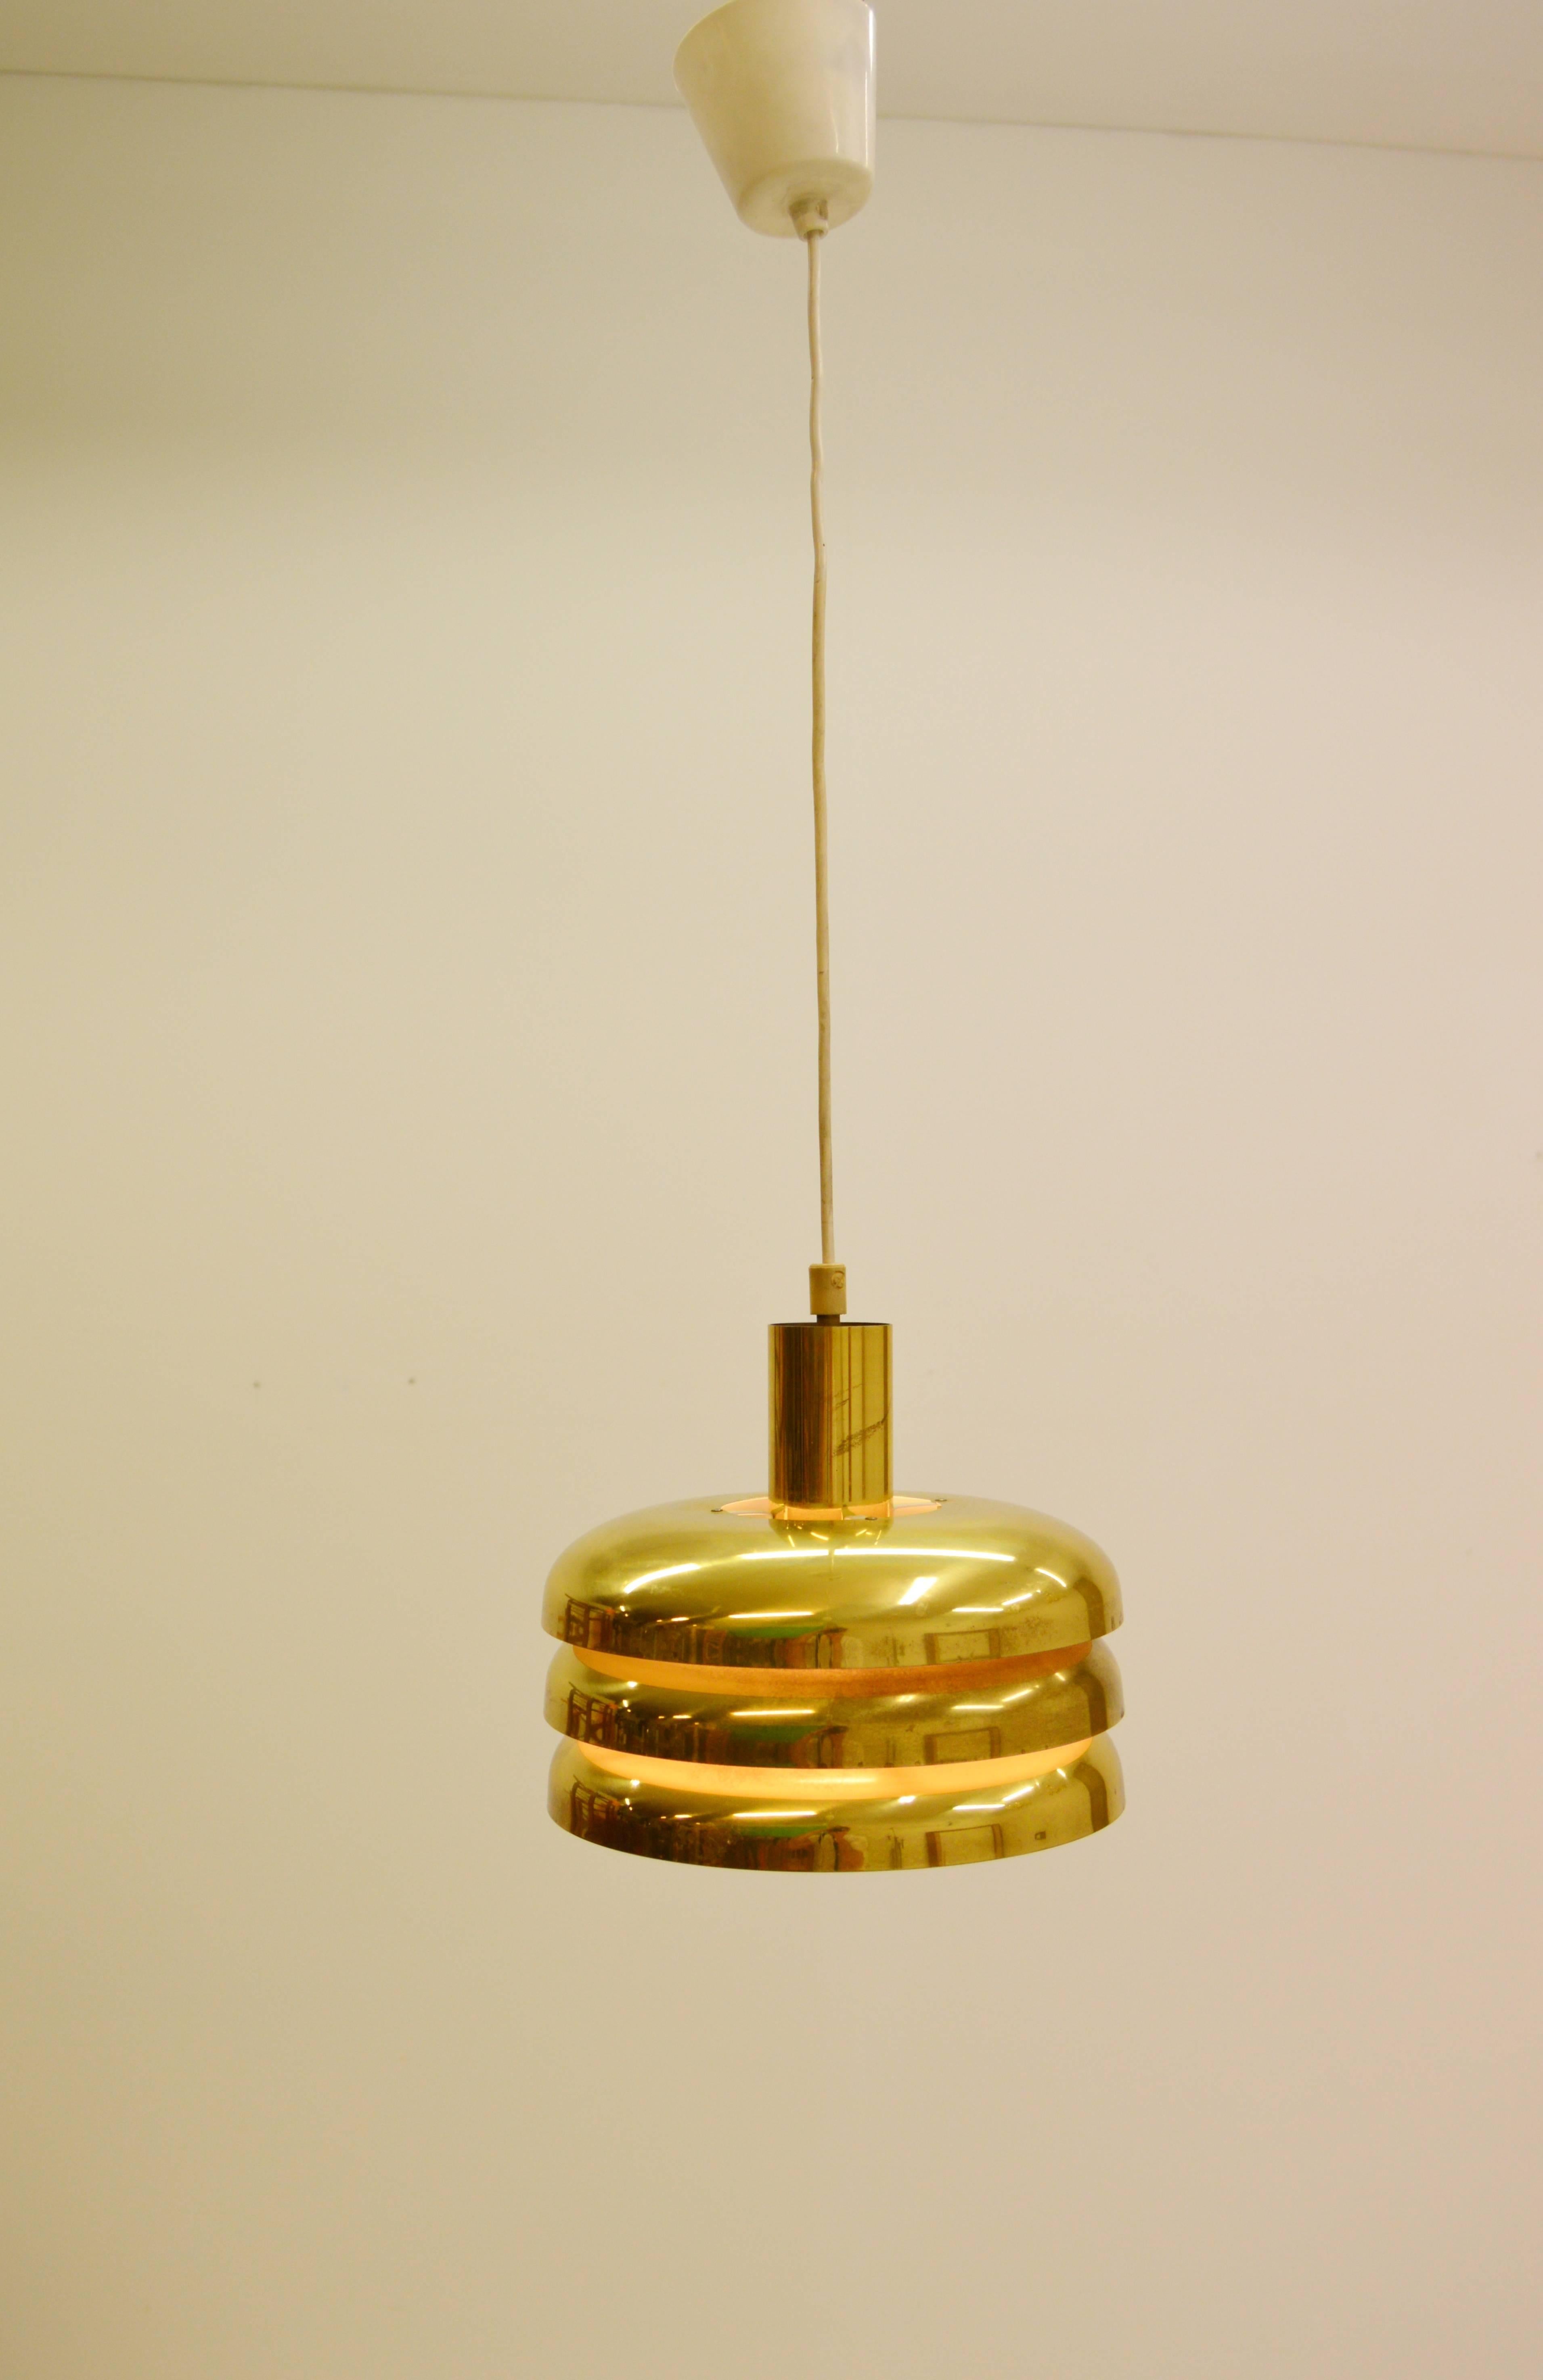 Brass ceiling light by Hans-Agne Jakobsson Markaryd, Sweden.
Three levels. White lacquered inside.